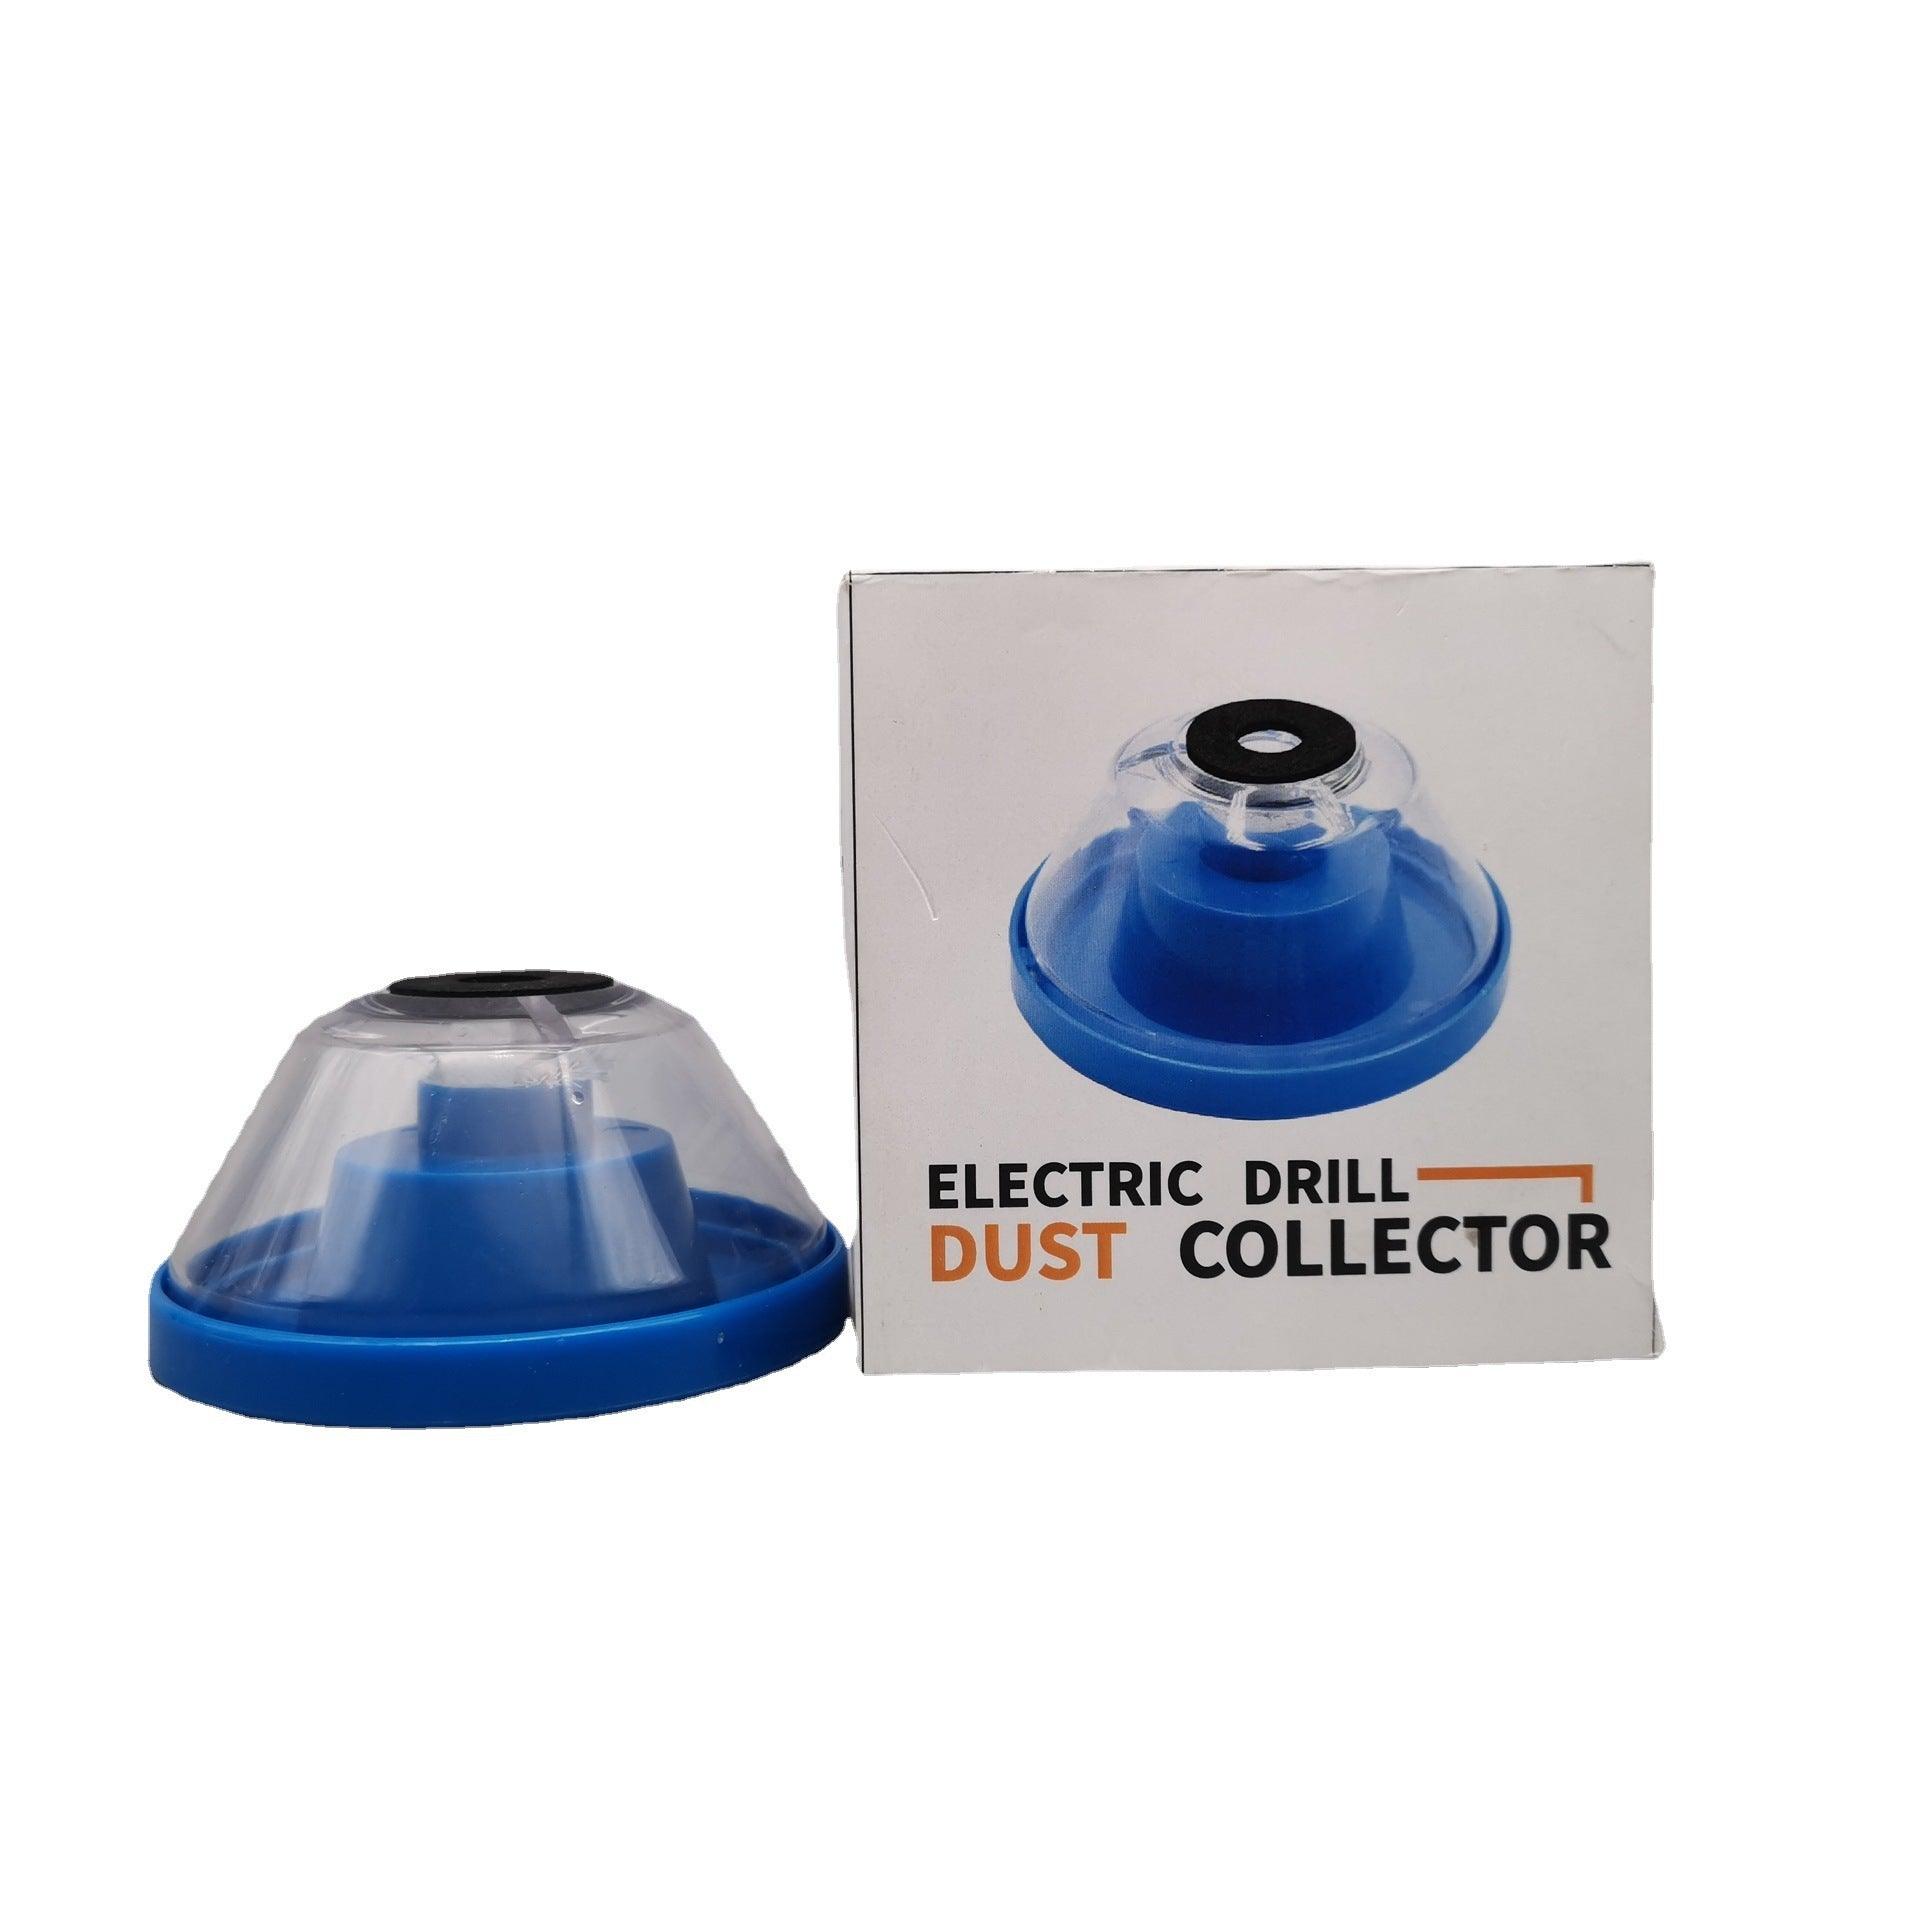 Electric Drill Dust Stopper - Silvis21 ™